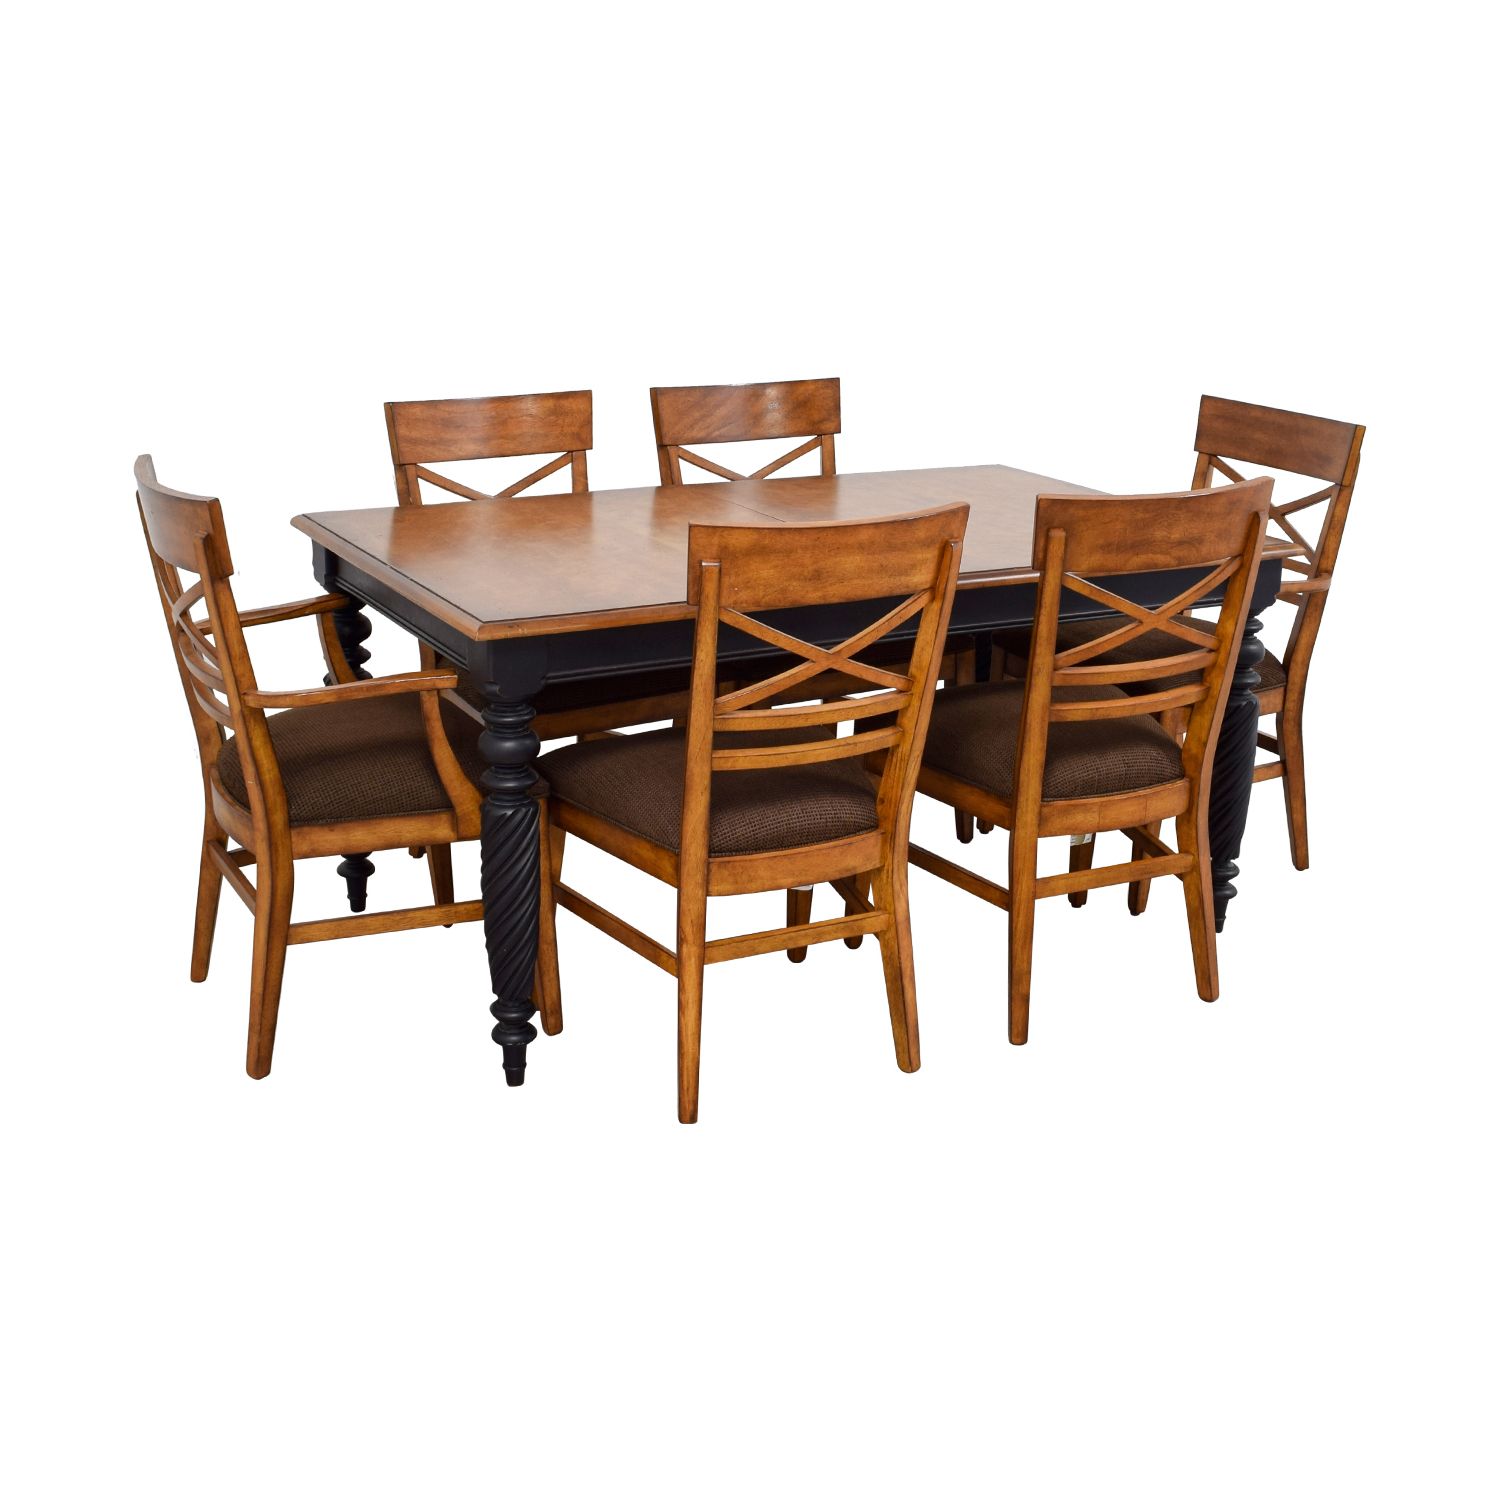 [%89% Off – Ethan Allen Ethan Allen Livingston Dining Set / Tables Pertaining To Newest Brown Wash Livingston Extending Dining Tables|brown Wash Livingston Extending Dining Tables In Well Liked 89% Off – Ethan Allen Ethan Allen Livingston Dining Set / Tables|most Up To Date Brown Wash Livingston Extending Dining Tables Inside 89% Off – Ethan Allen Ethan Allen Livingston Dining Set / Tables|most Recently Released 89% Off – Ethan Allen Ethan Allen Livingston Dining Set / Tables With Brown Wash Livingston Extending Dining Tables%] (View 17 of 25)